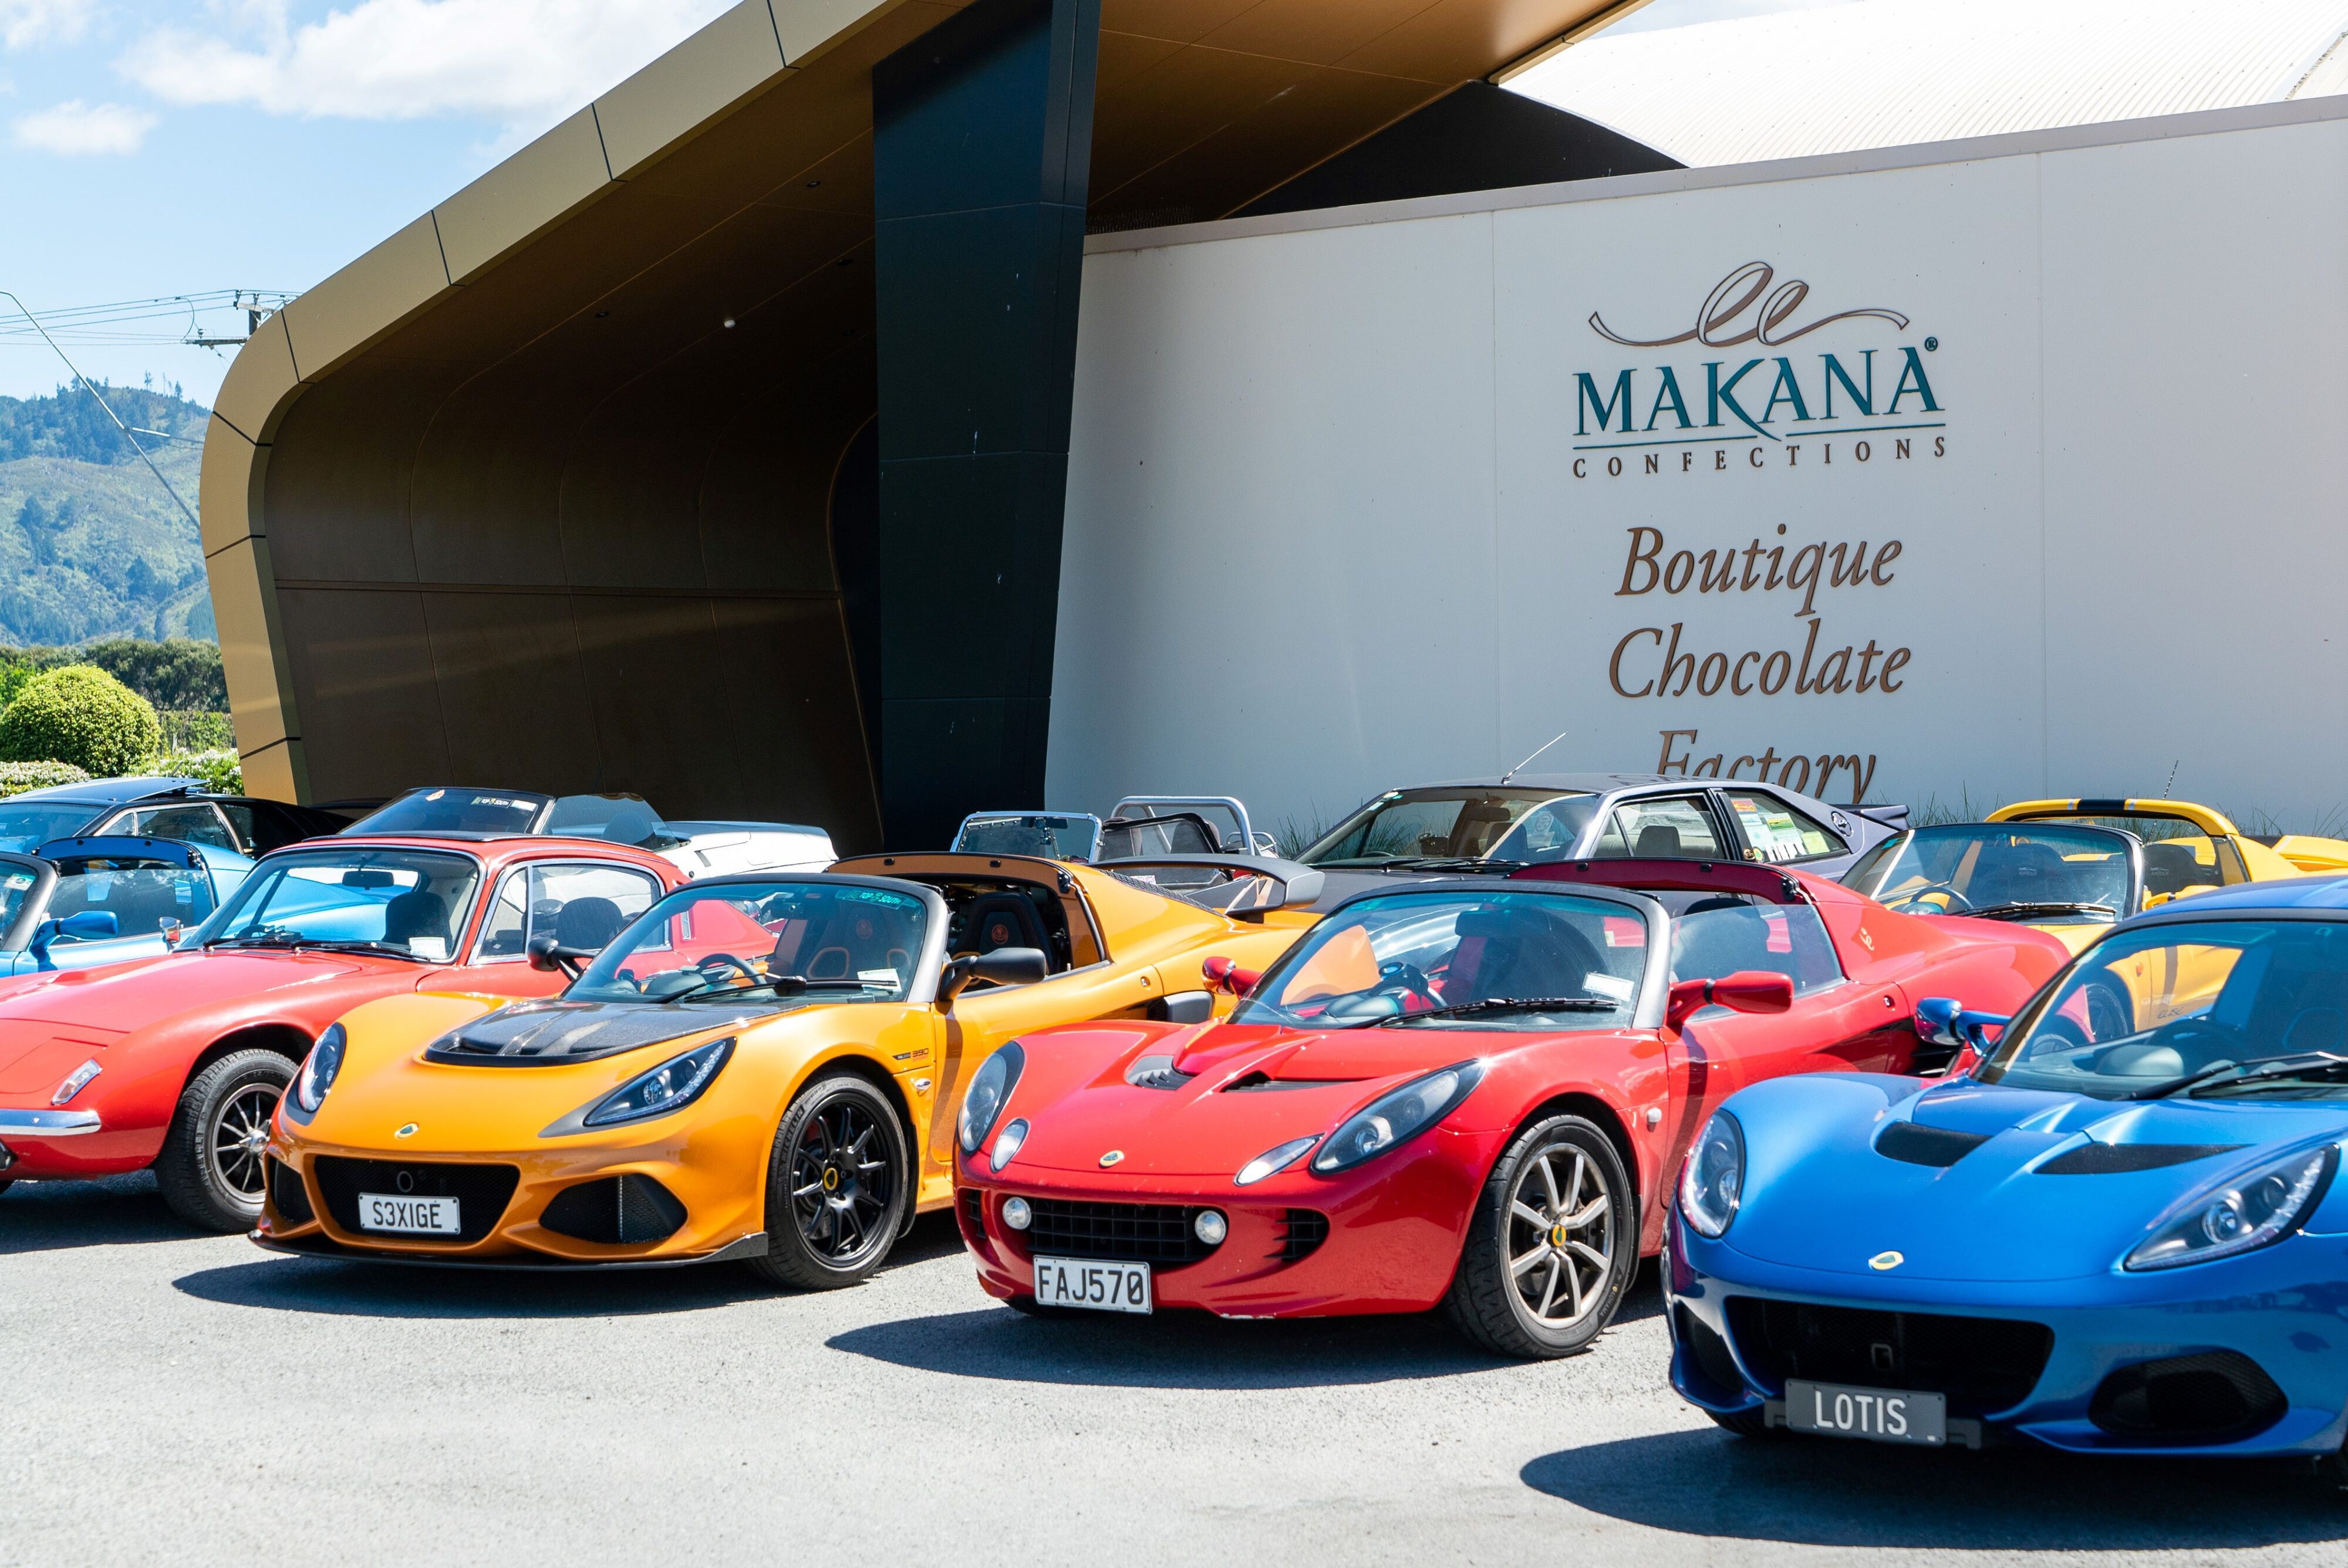 An array of Lotus vehicles parked outside Makana Confections in New Zealand. This was a stop during the brand's 75th Anniversary celebrations.